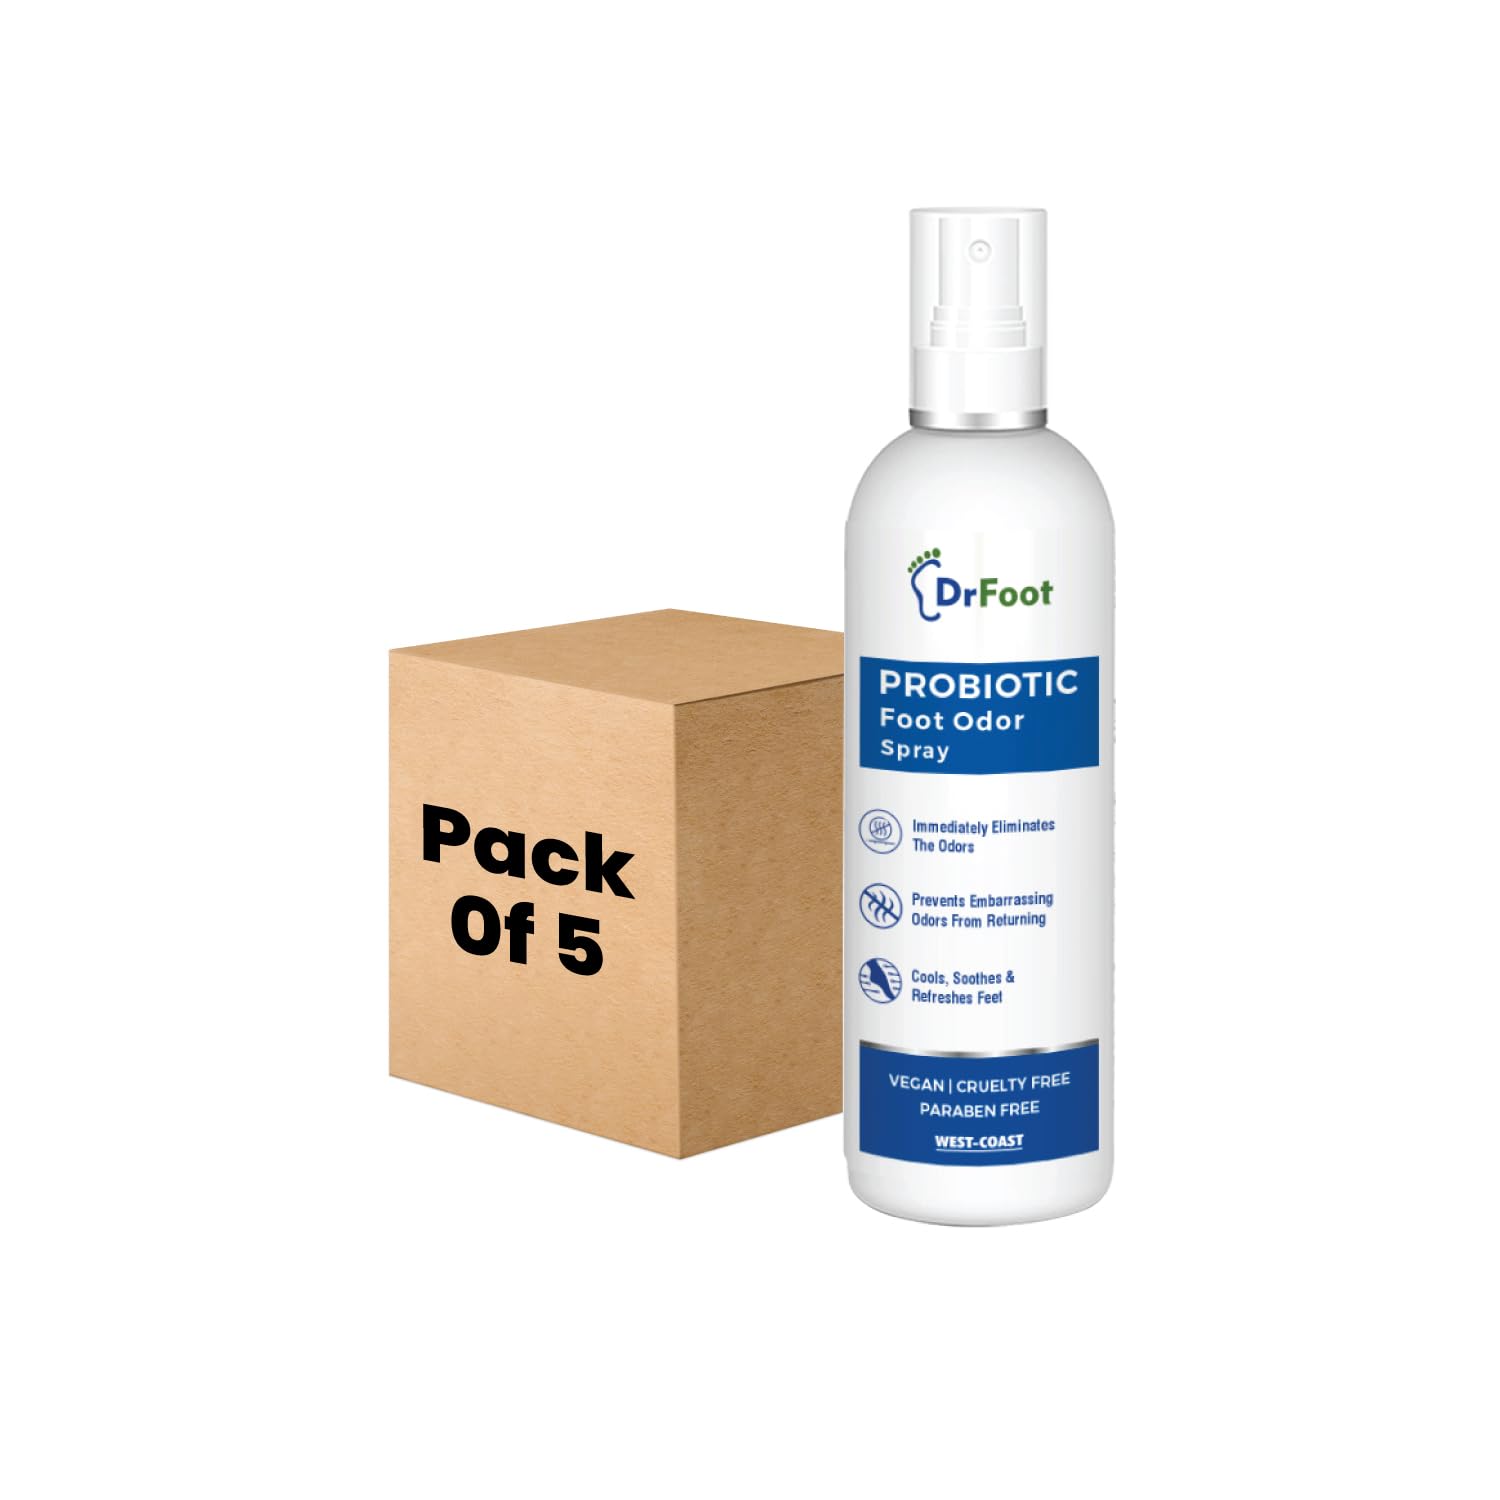 Dr Foot Probiotic Foot Odor Spray Helps to remove Feet & Shoes Worst Odors, Cools, Soothes & Refreshes Feet with the goodness of Lemon Grass Oil, Tea Tree Oil - 100ml (Pack of 5)